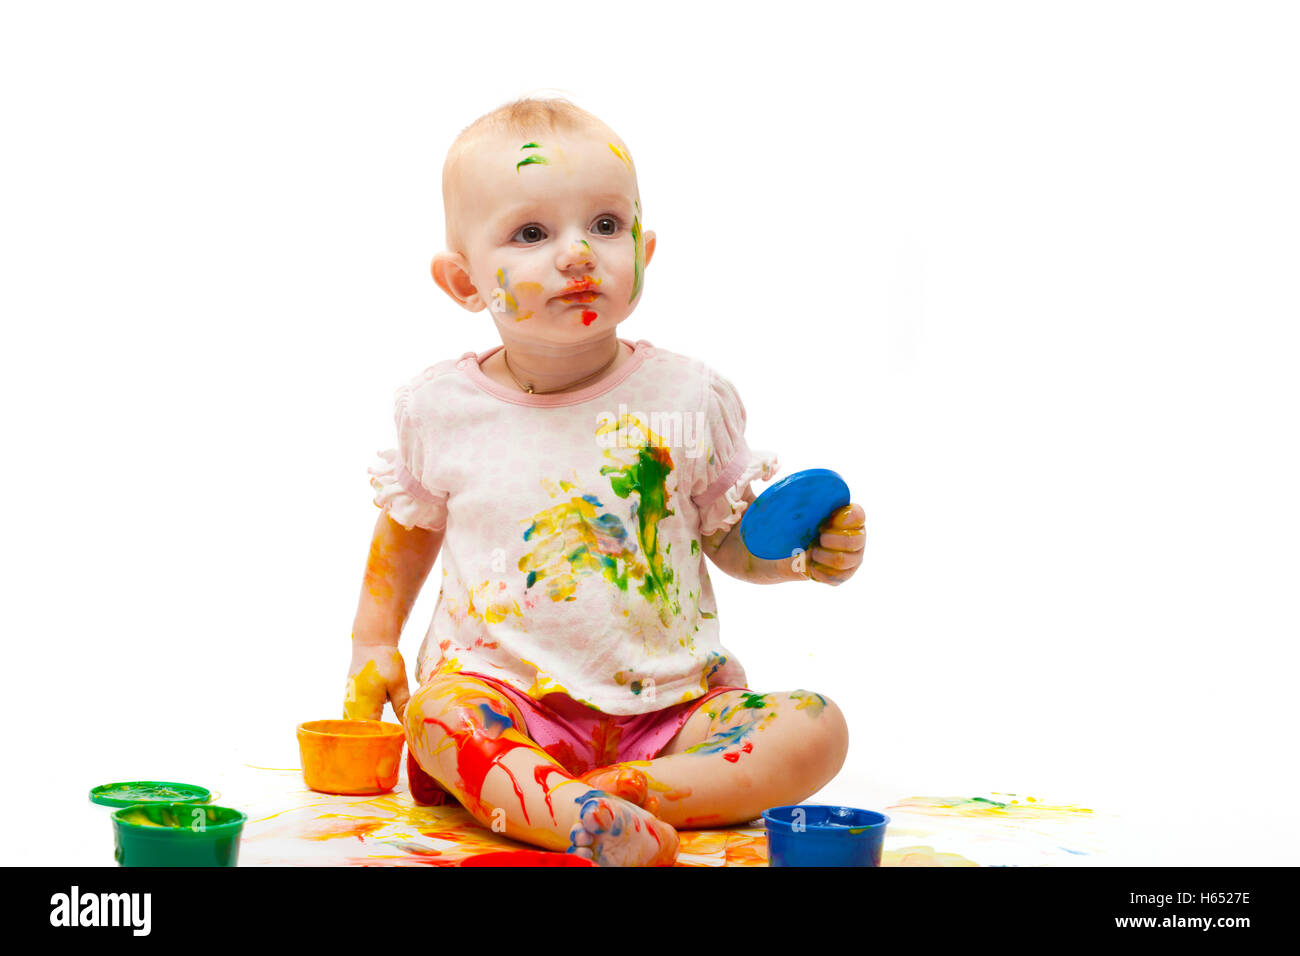 little girl soiled by multi-colored paints Stock Photo